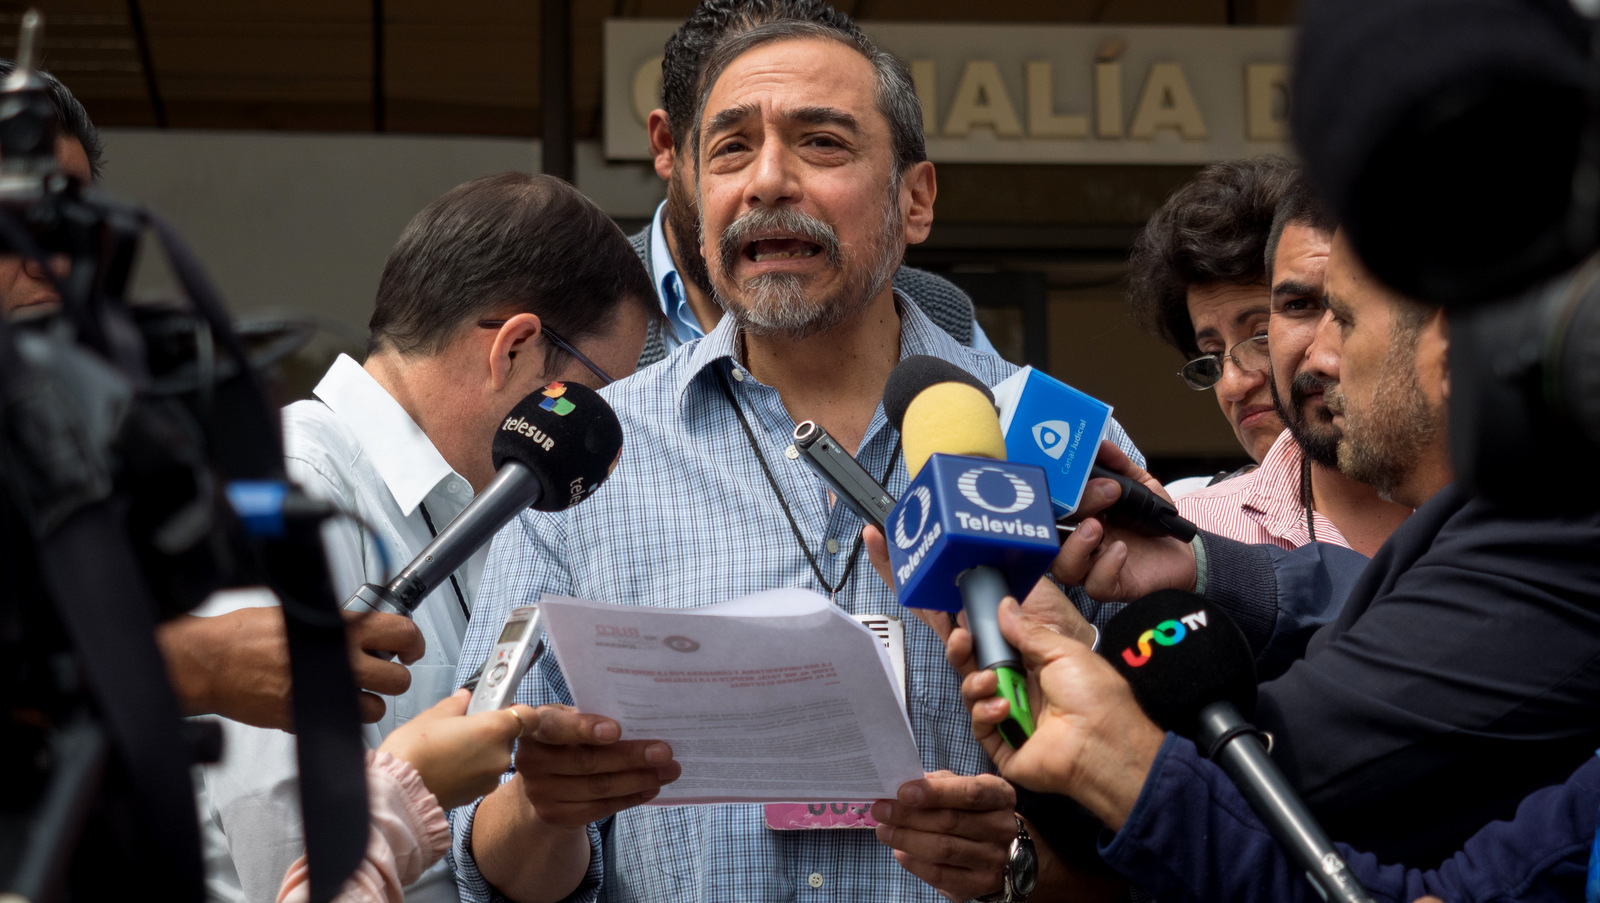 A supporter of the University and Citizen Network for Democracy addresses the media detailing their demands of the National Electoral Institute, Mexico City, June 21, 2018. José Luis Granados Ceja